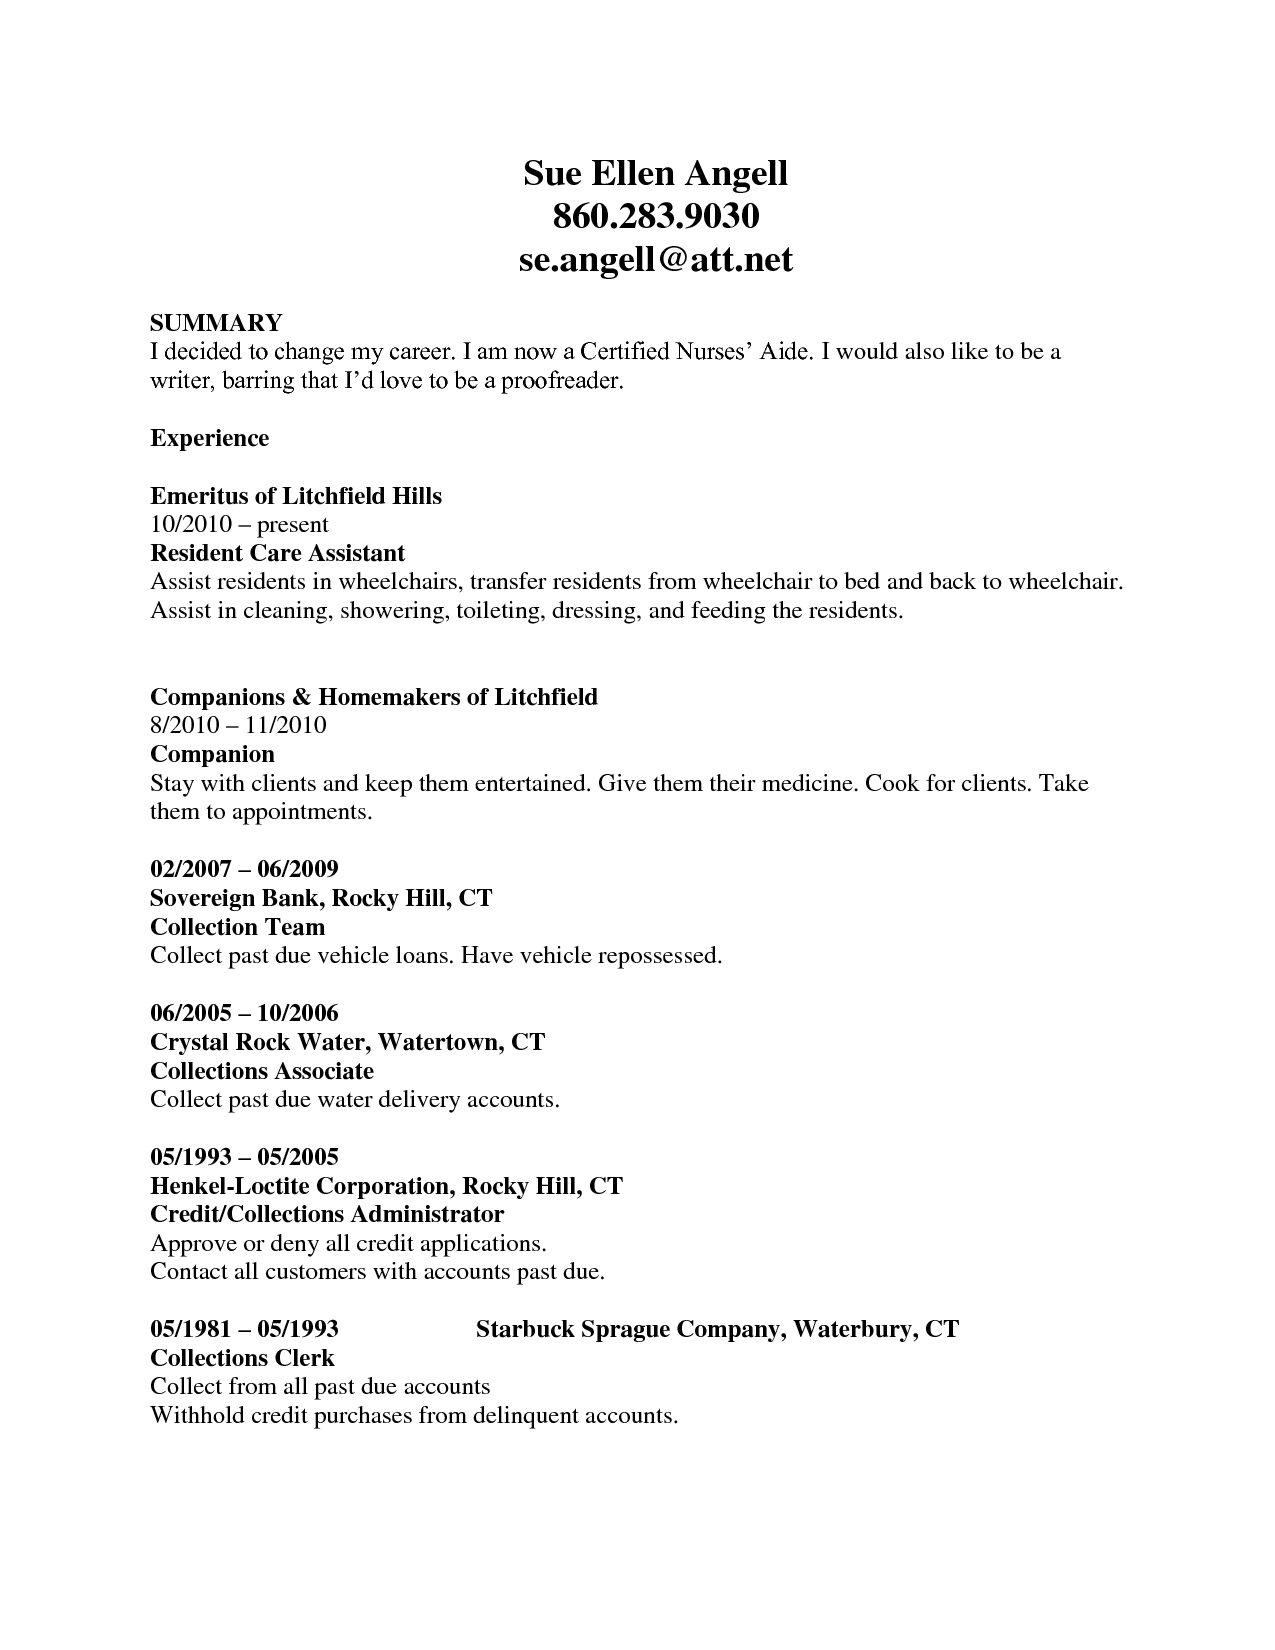 Objective Resume Ideas Writing A Winning Cna Resume Examples And Skills For Cnas